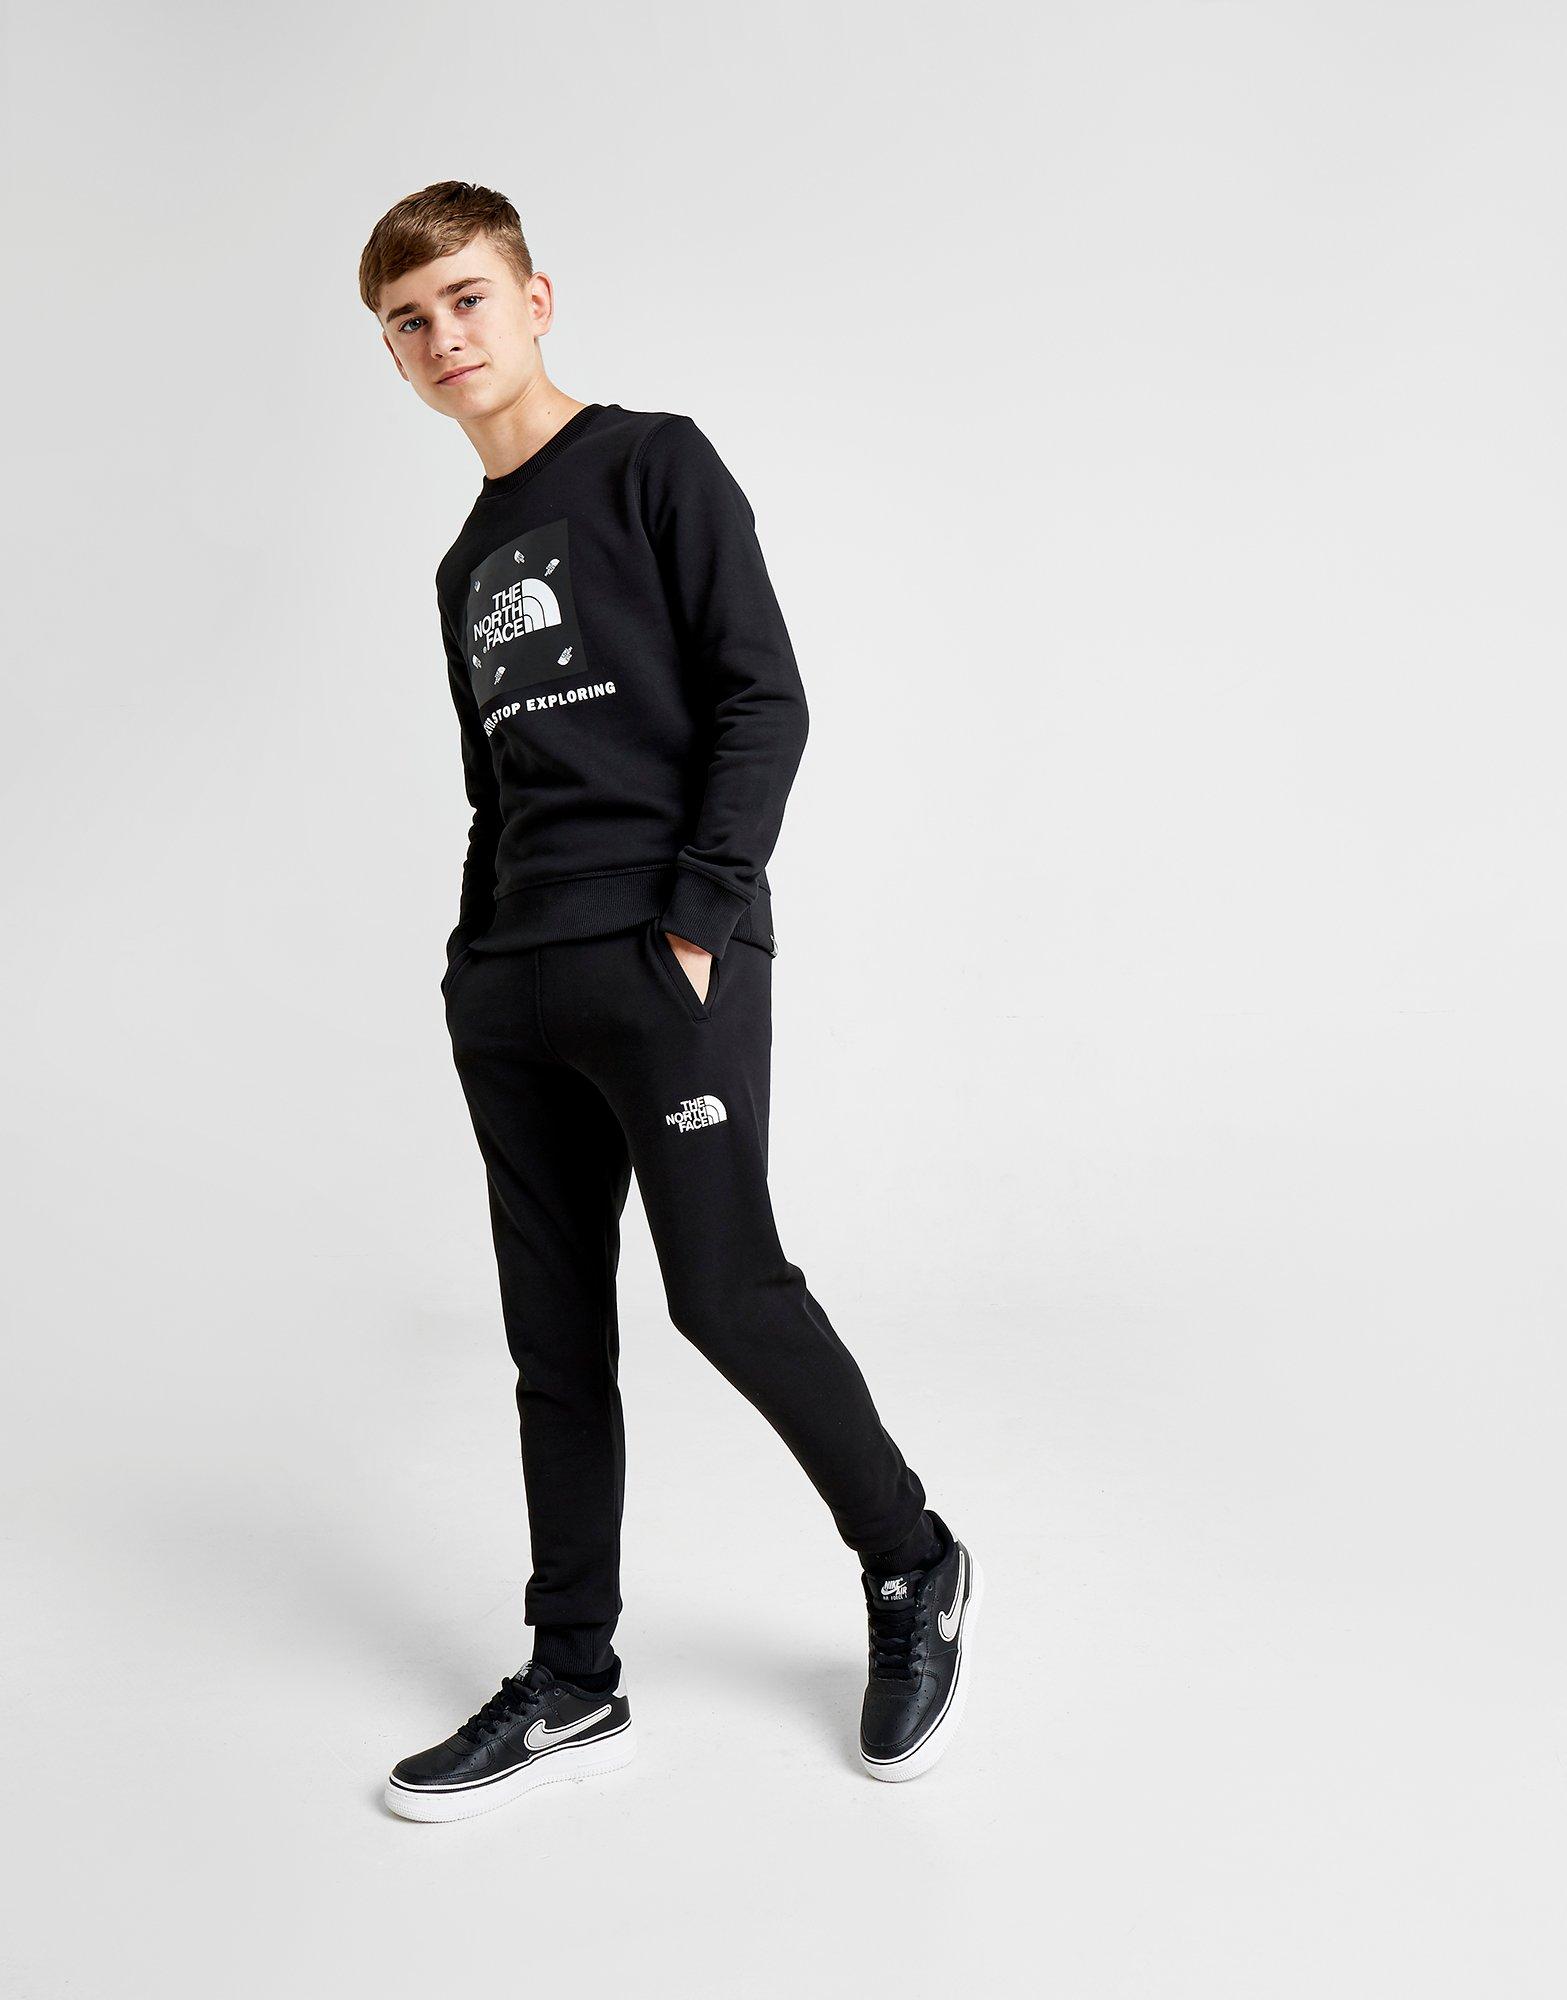 the north face boys joggers